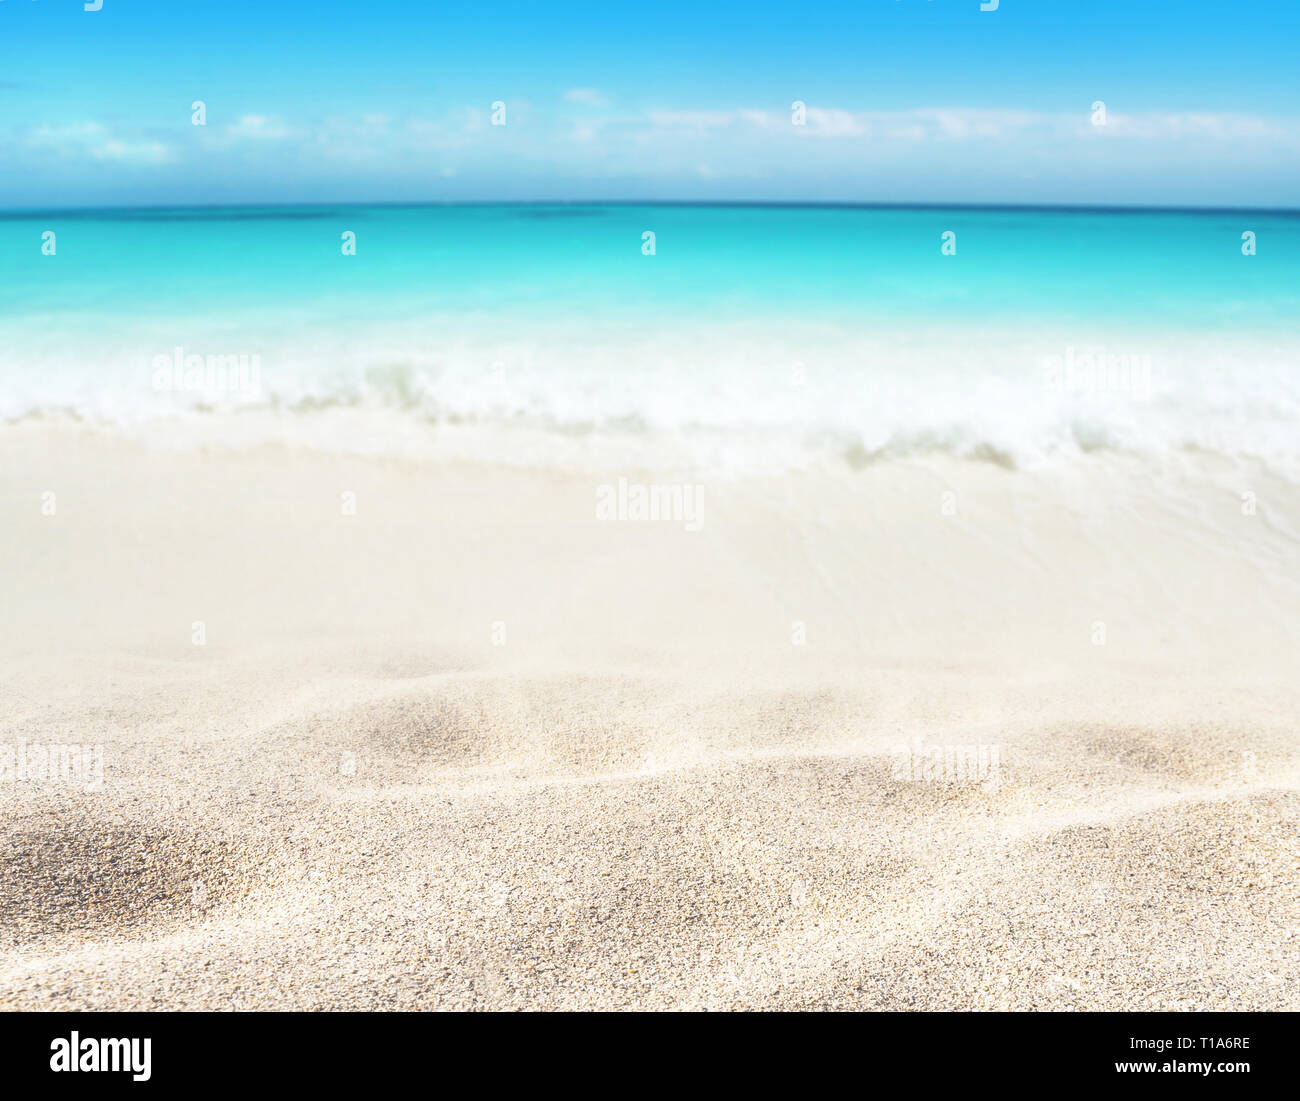 Beach blurred background. Tropical island paradise. Sandy shore washing by the wave. Bright turquoise ocean water.  Dreams summer vacations destinatio Stock Photo